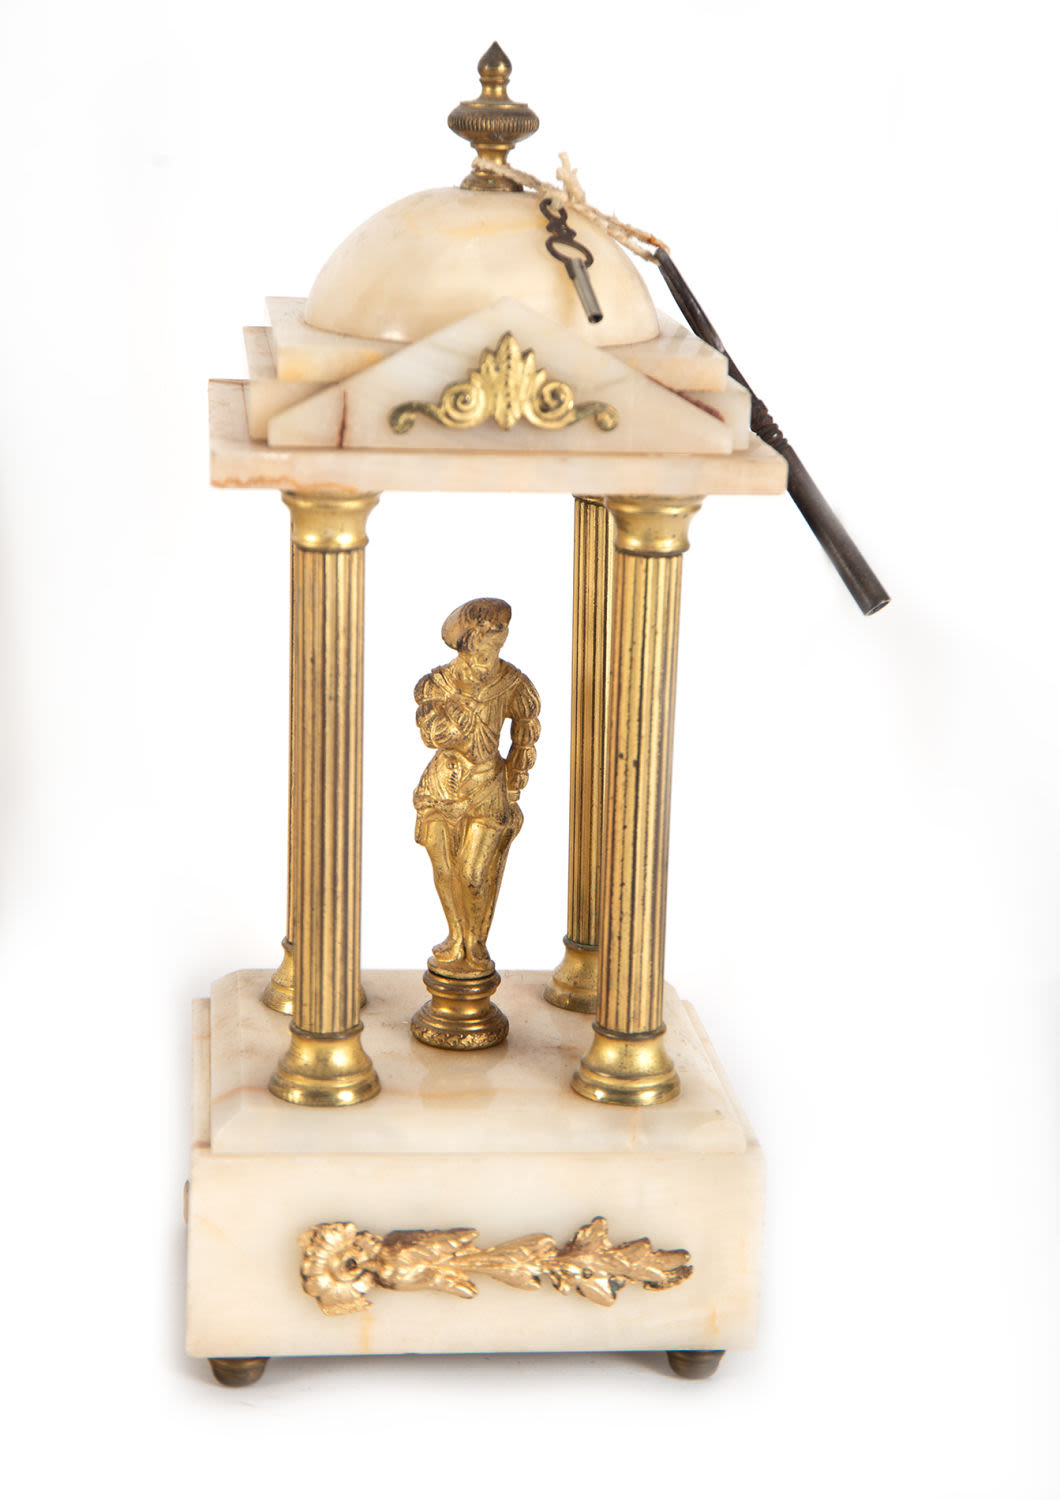 Neoclassical garniture in alabaster with temples and figures in gilt bronze - Image 4 of 8